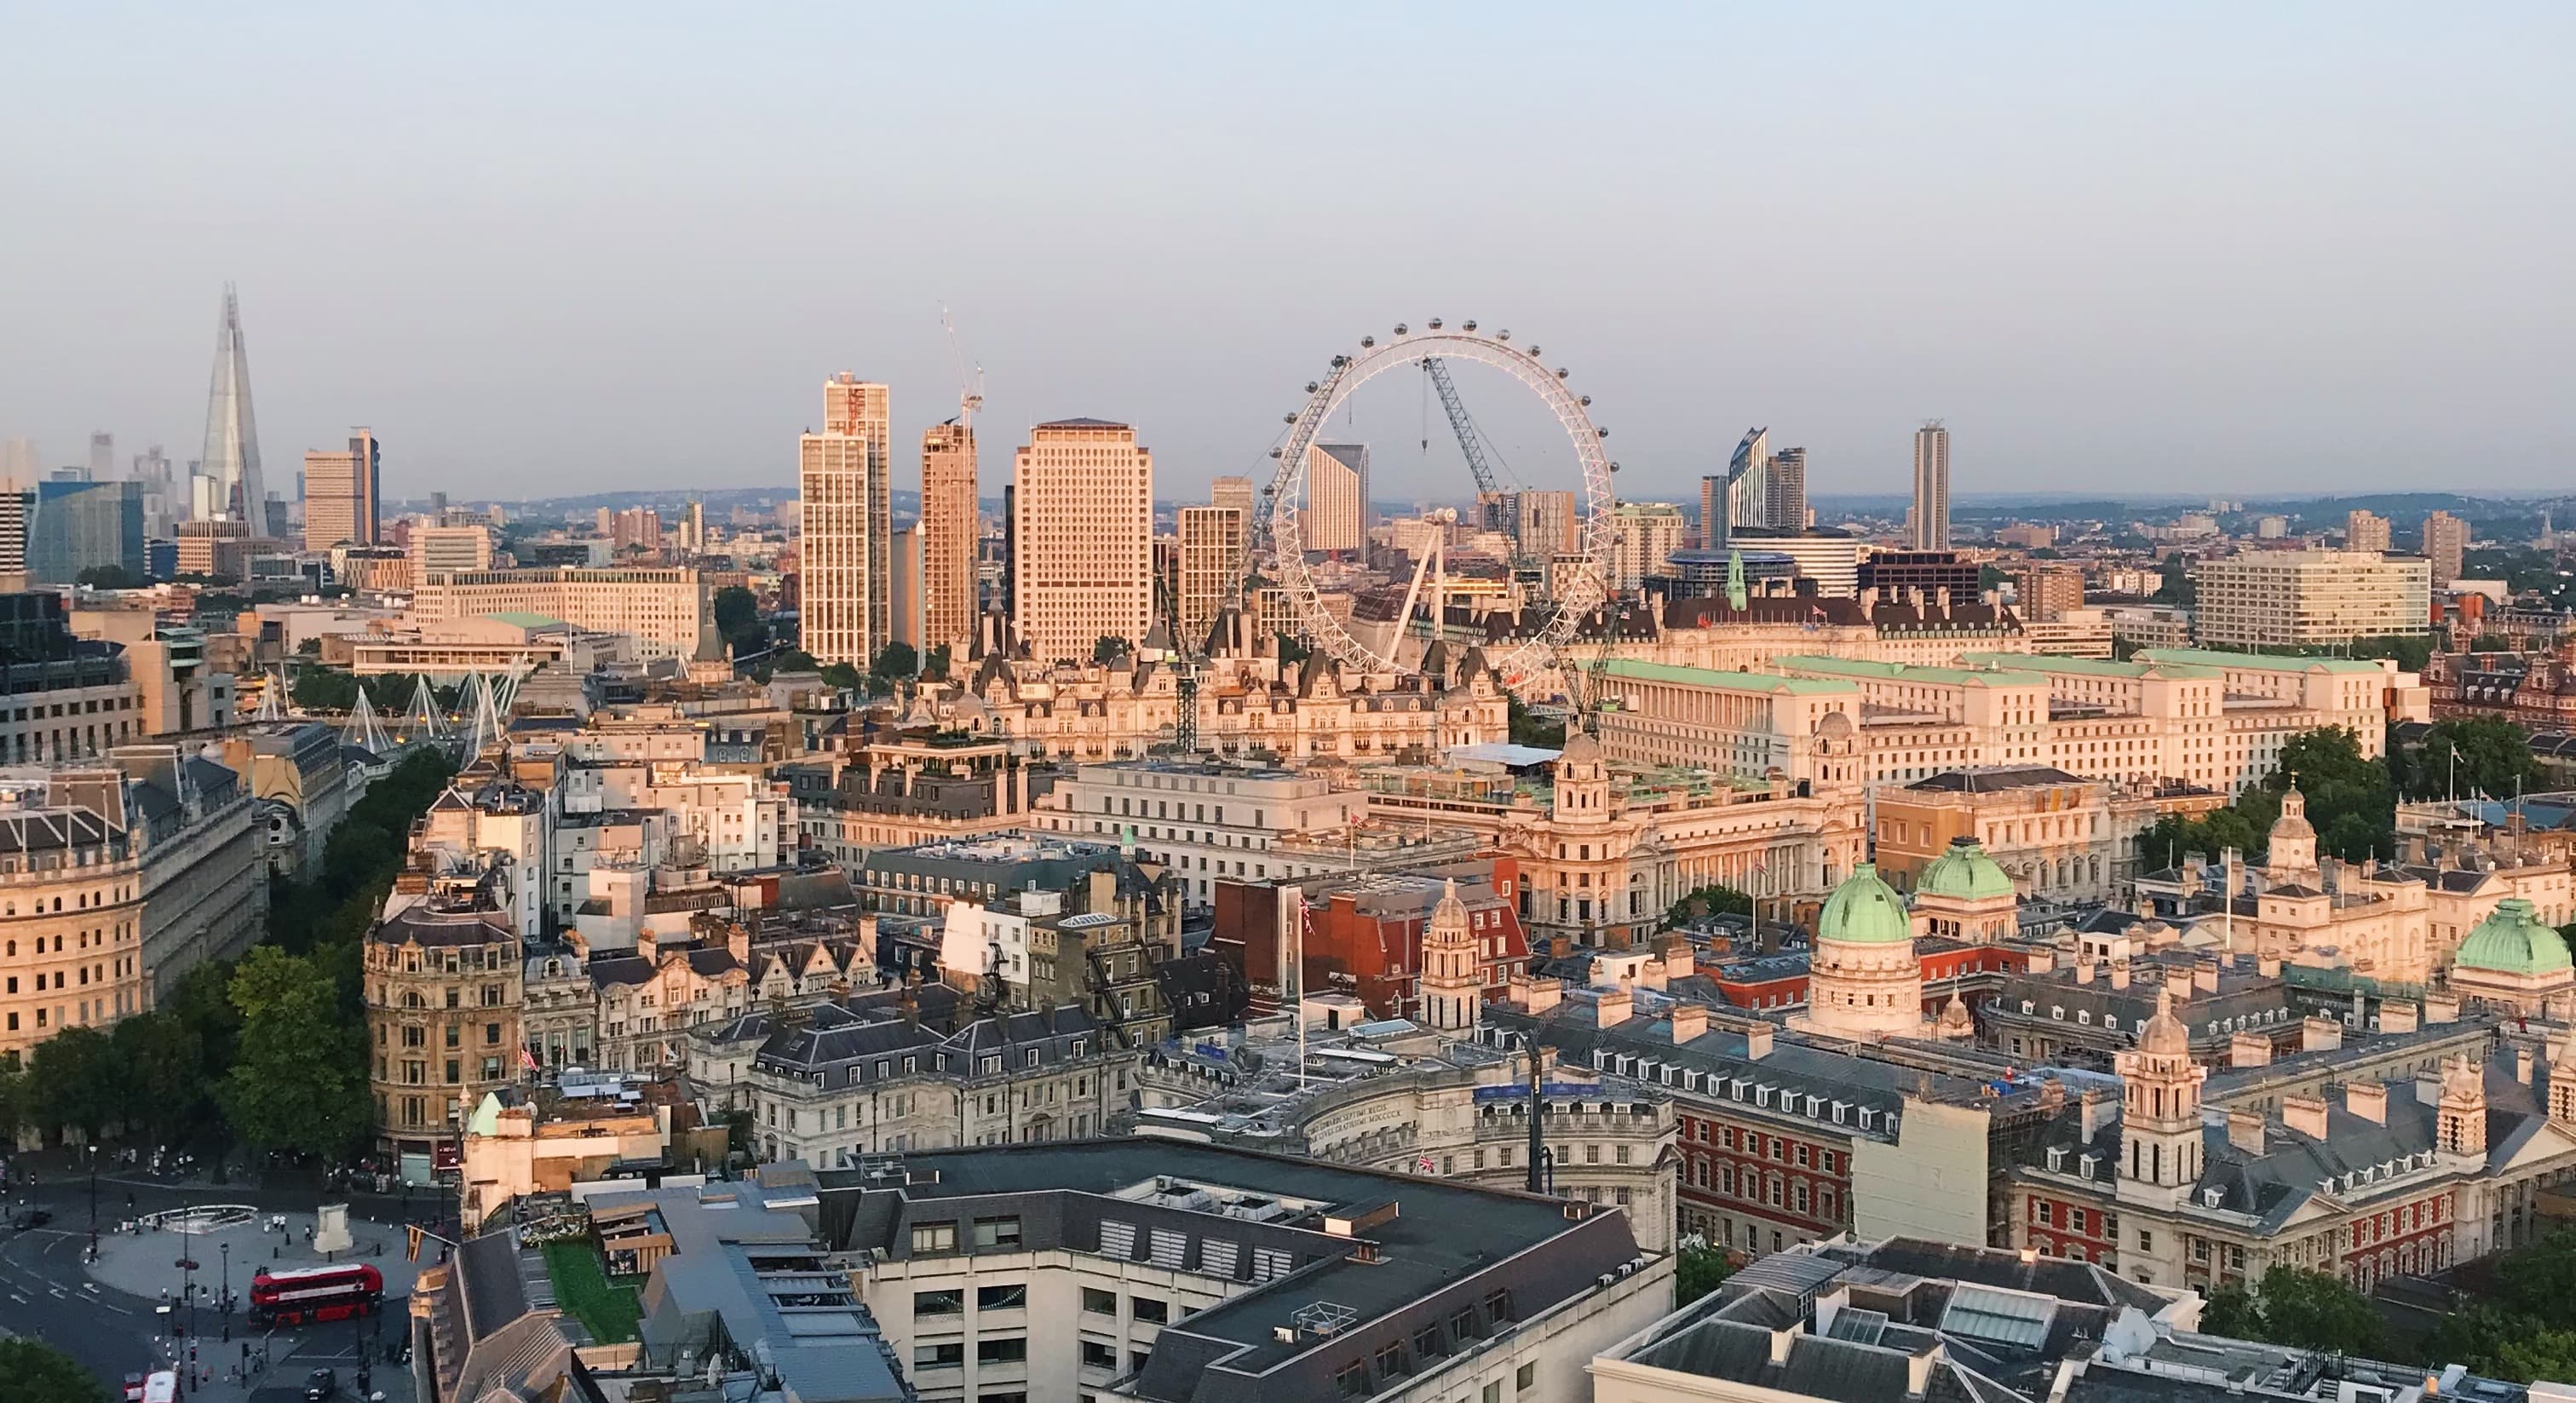 London skyline viewed from above including the London Eye, the Shard and Trafalgar Square